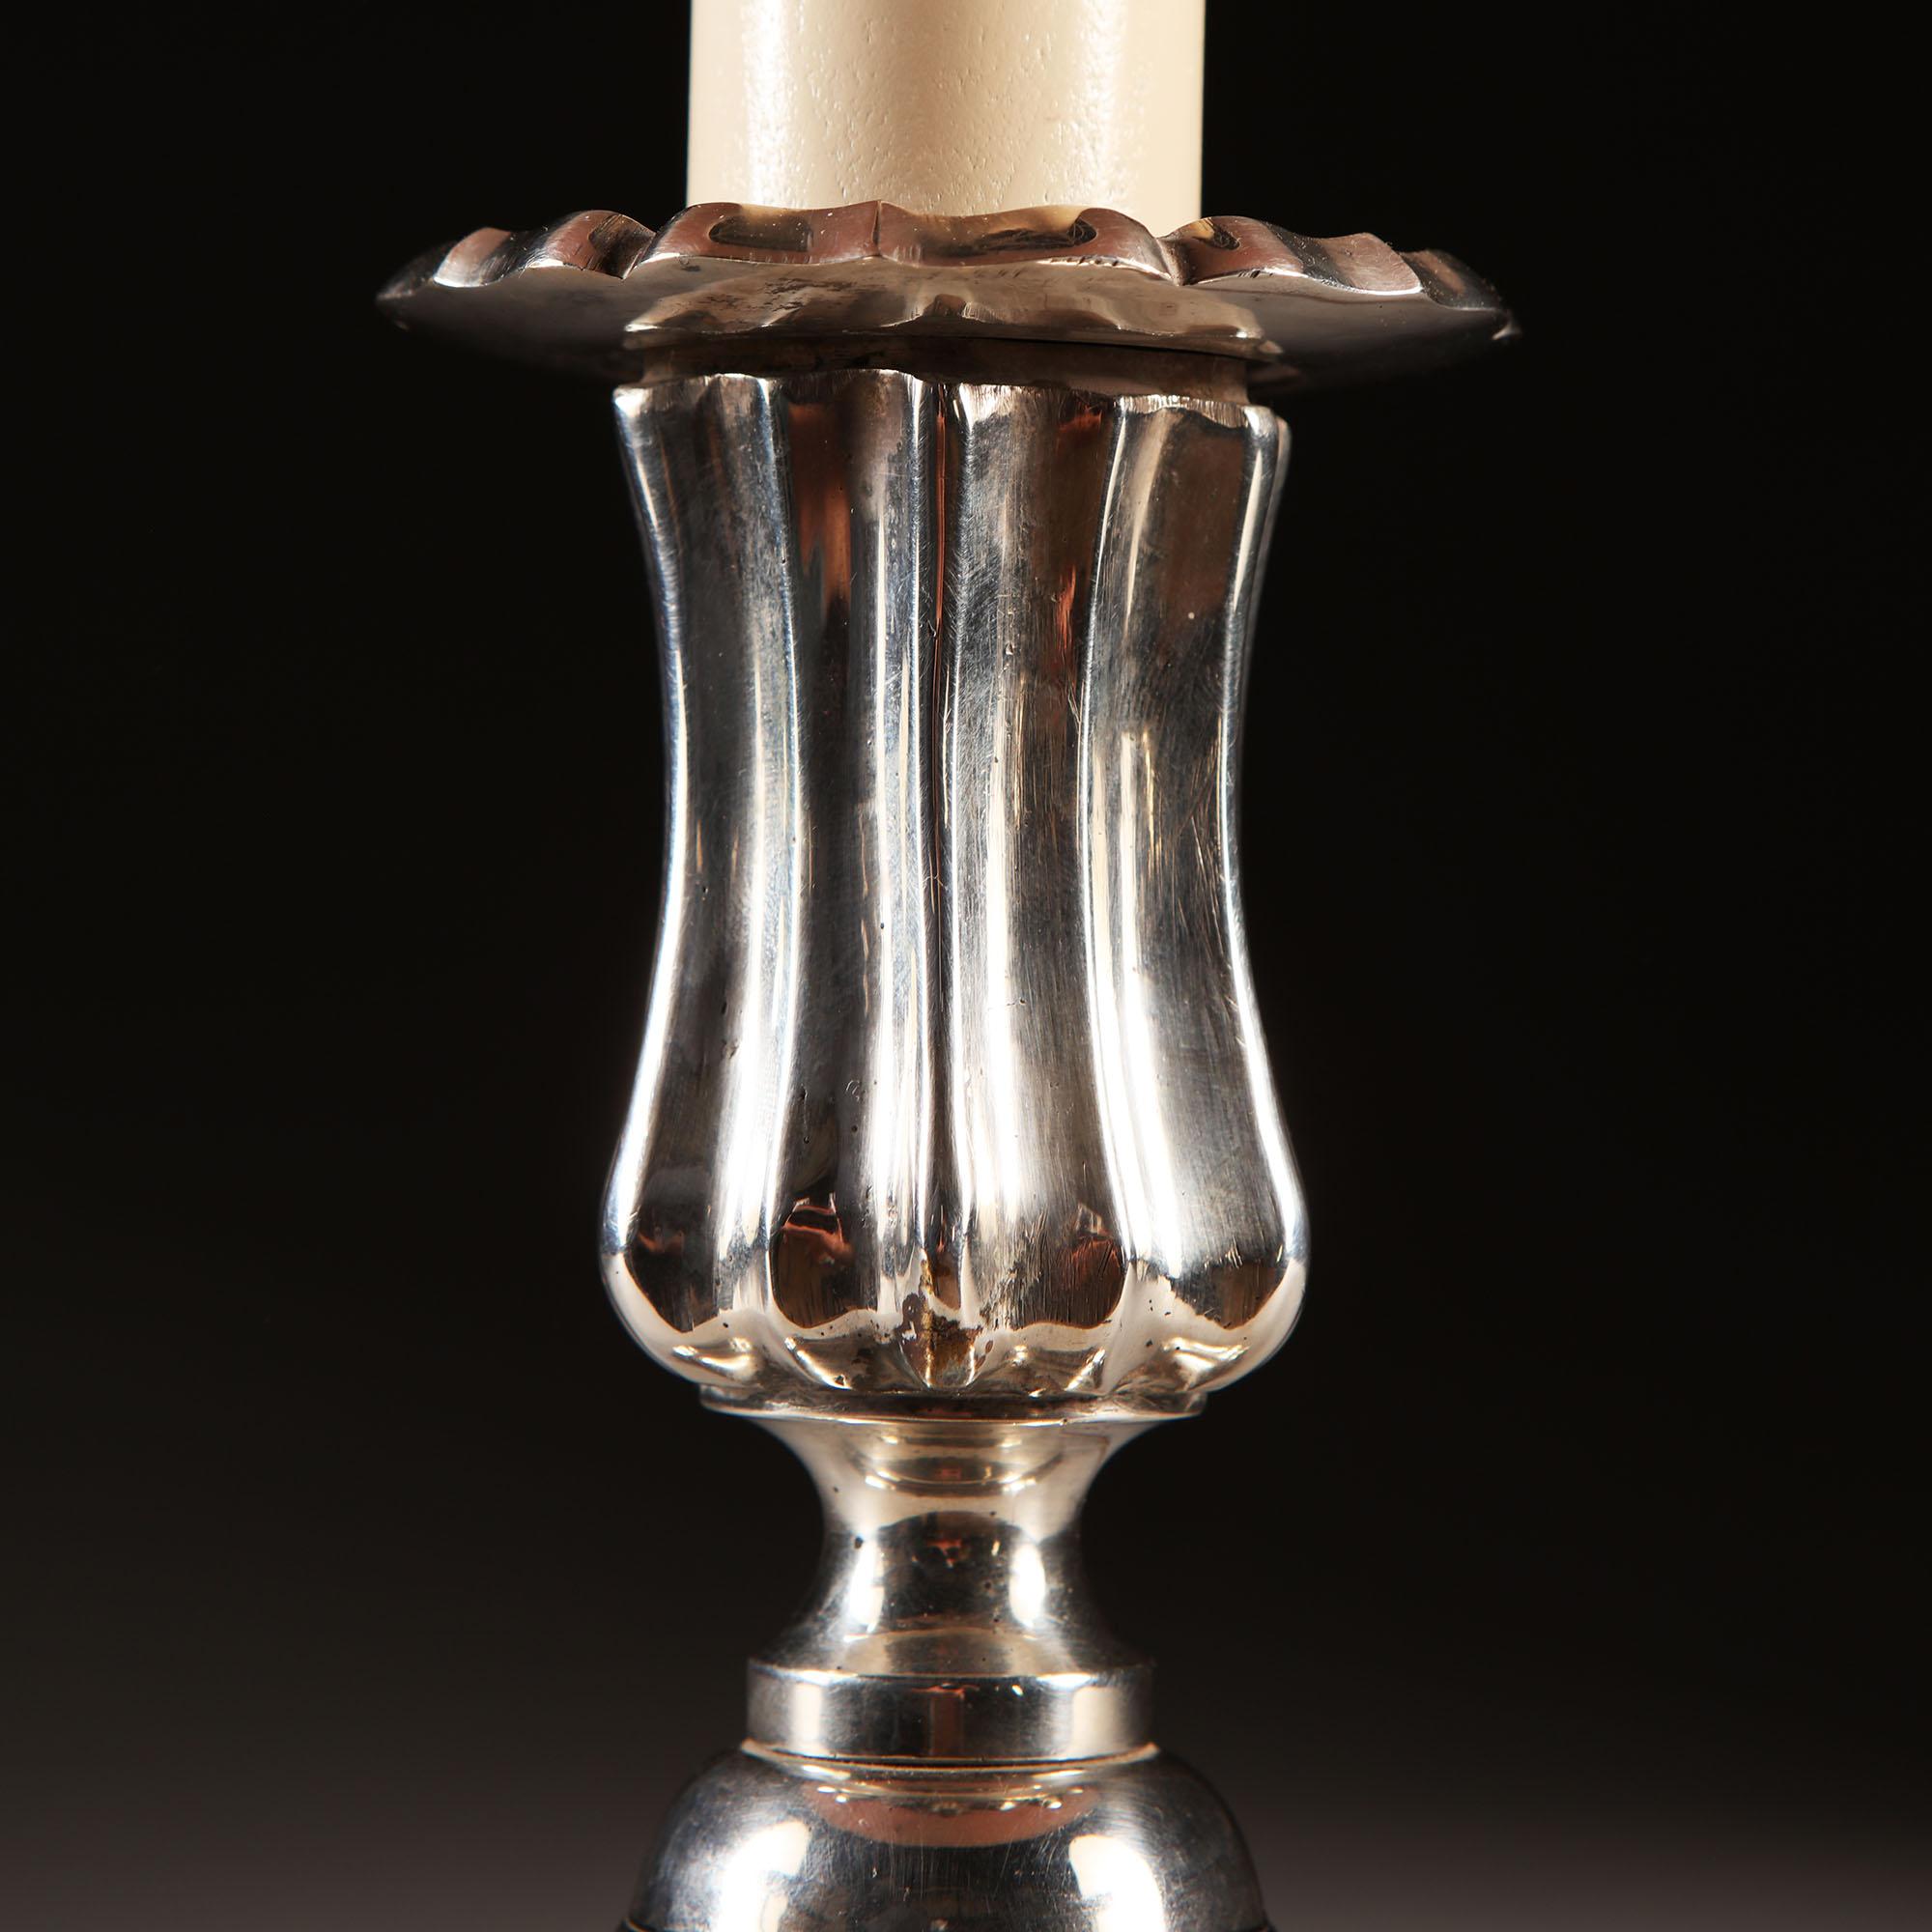 English Early 20th Century Edwardian Silver Candlestick as a Table Lamp